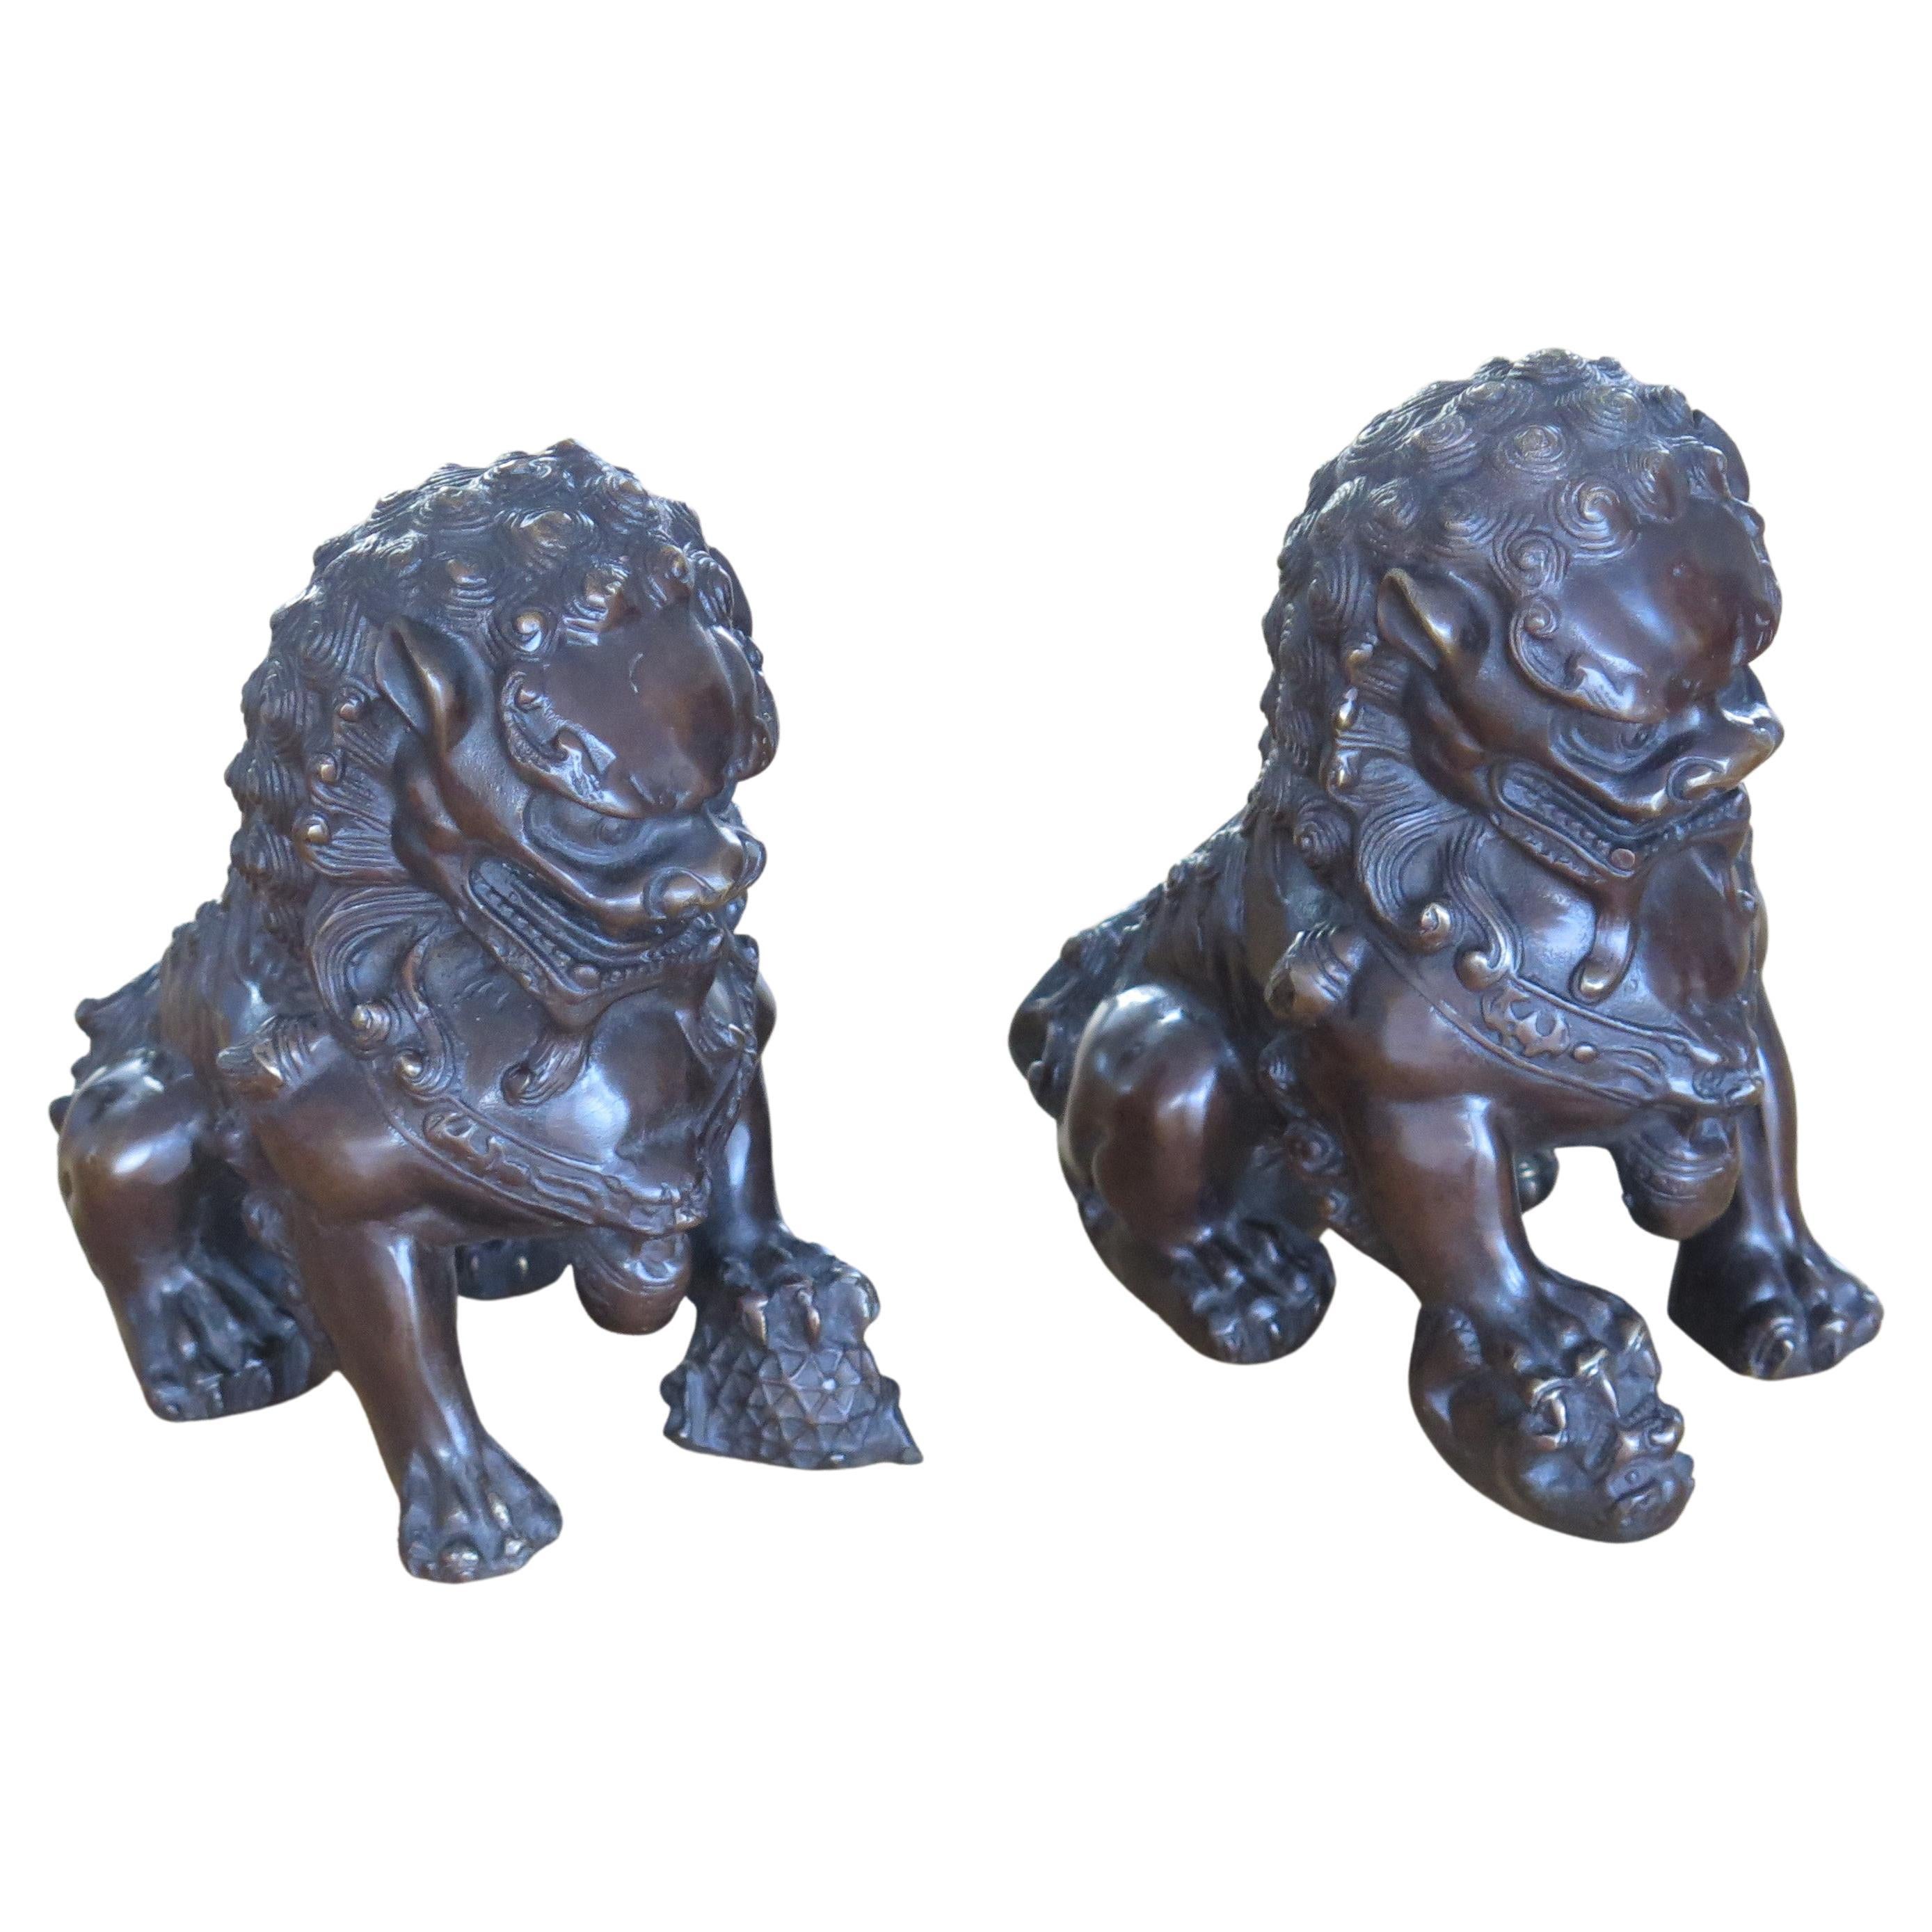 Pair of Chinese Bronze Foo or Lion Dogs Good Detail, Circa 1920s